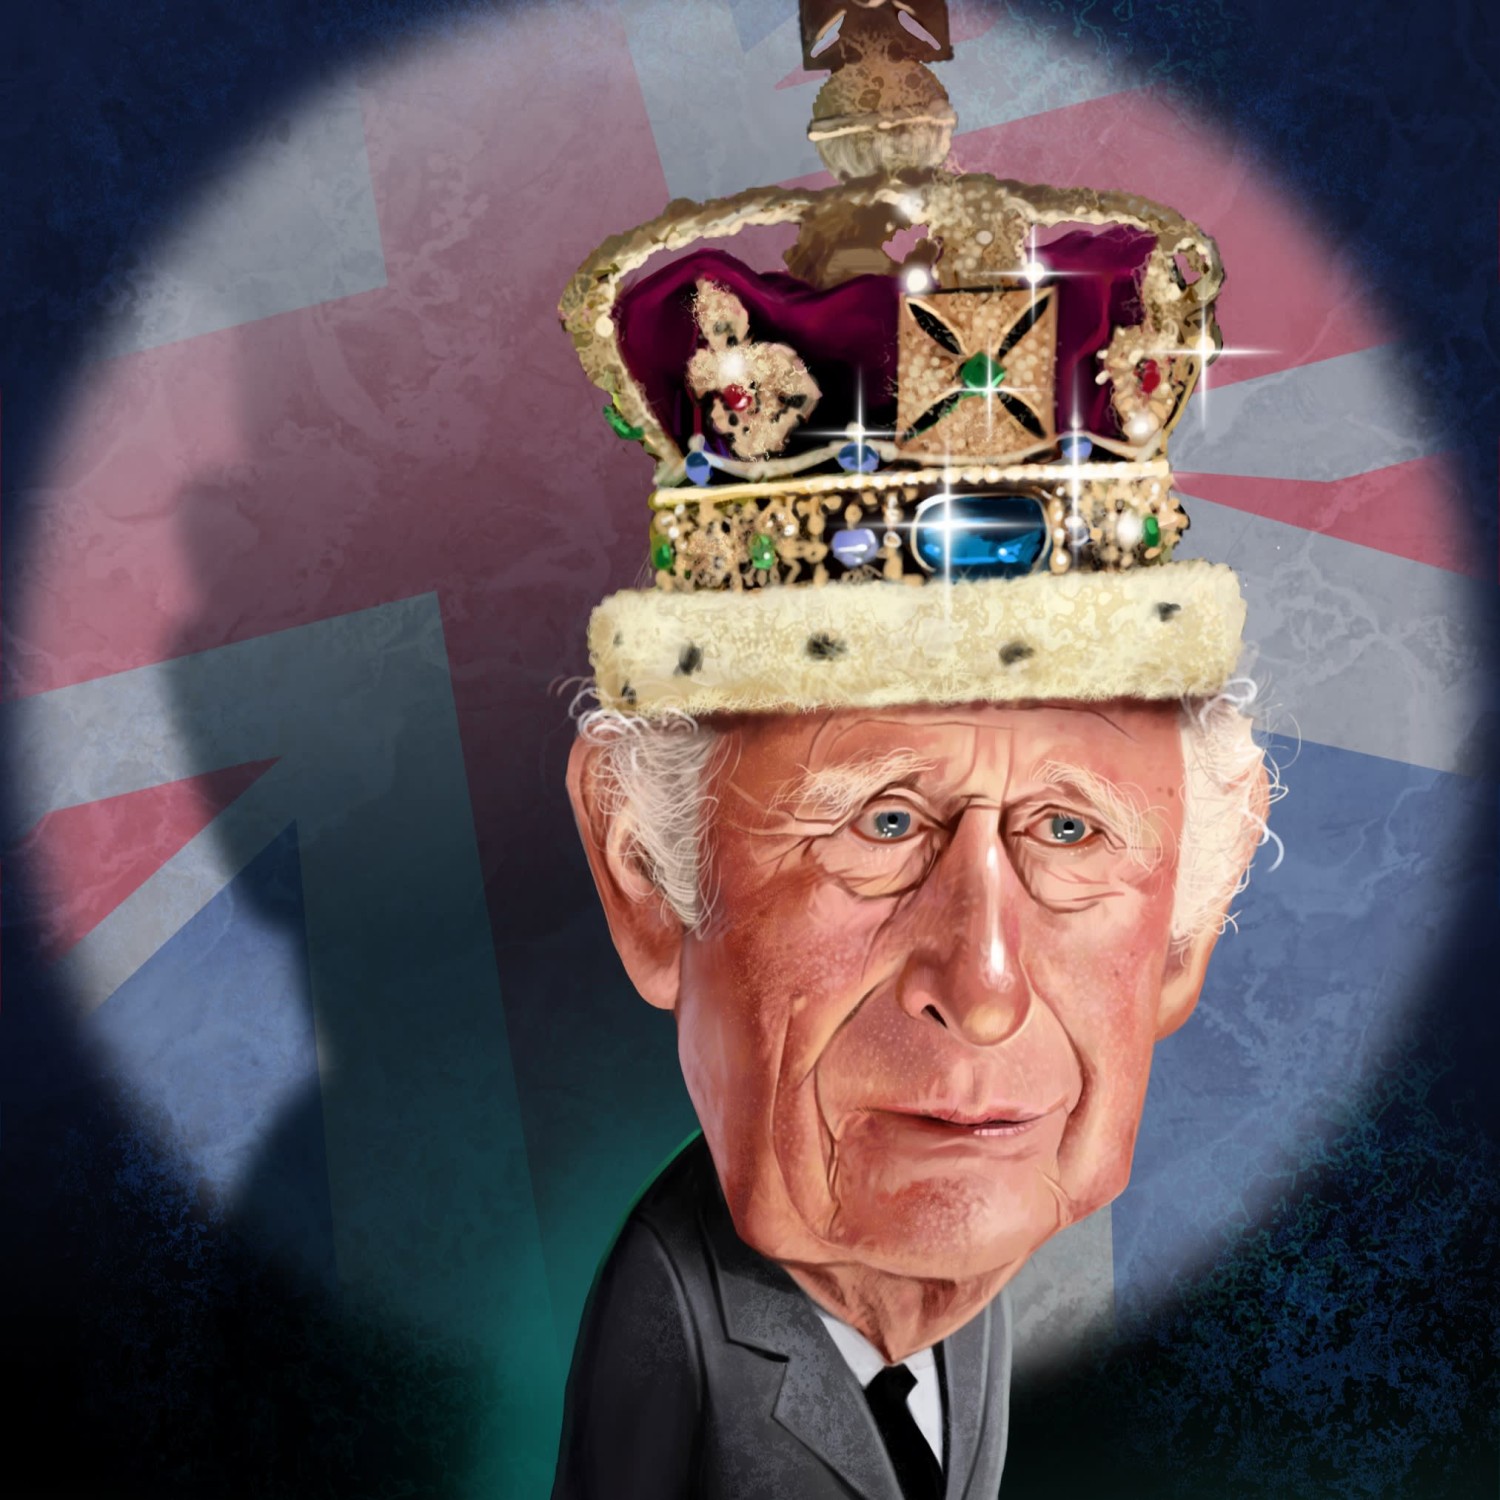 The new monarch may no longer be as outspoken on the subjects he has previously championed